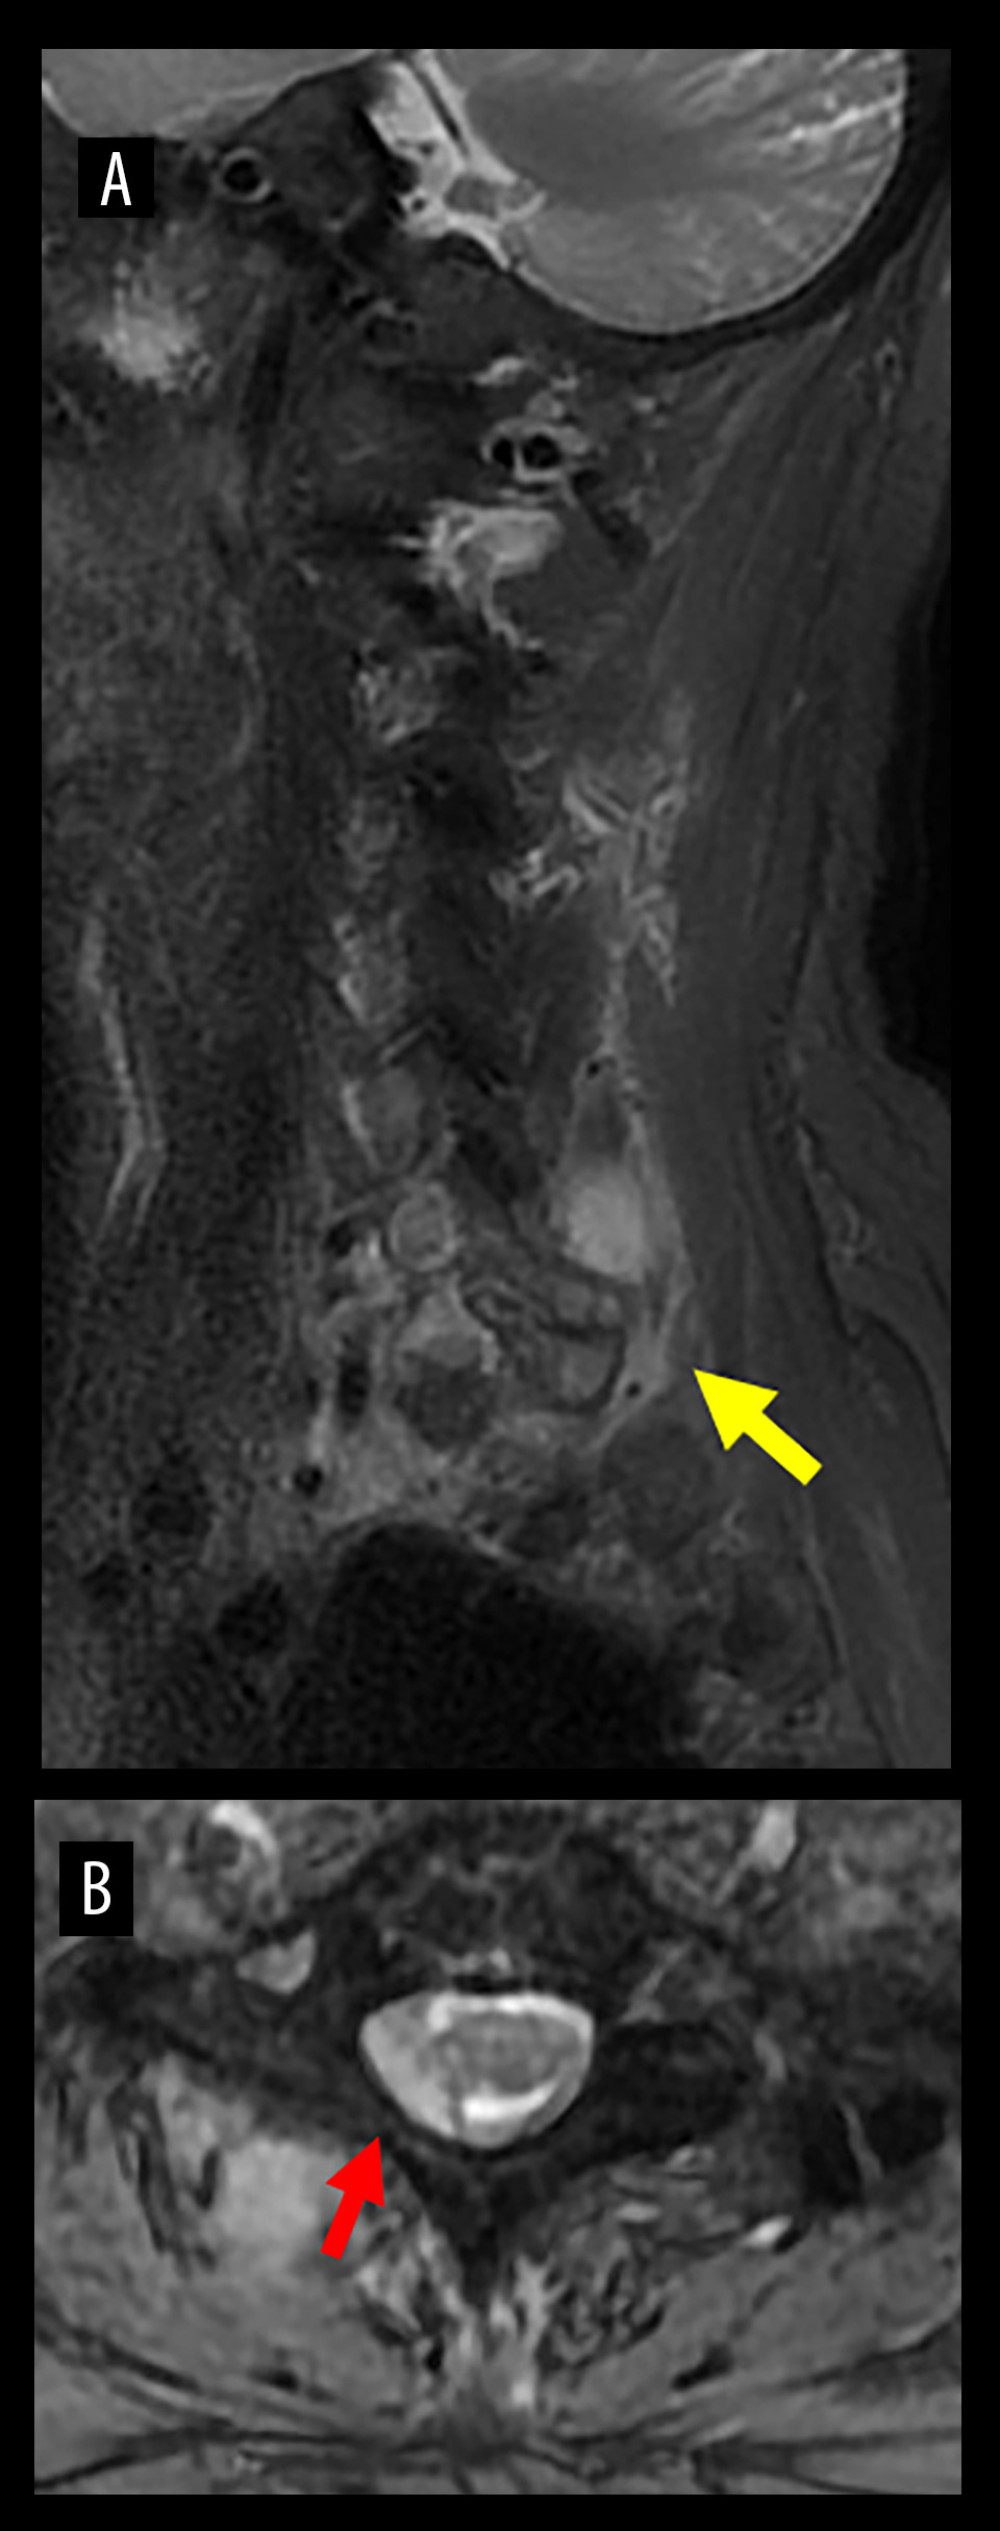 MRI of the cervical spine at admission. Sagittal (A) and axial (B) STIR images. High signal change in the right facet joint and paraspinal muscle of C7/Th1 (yellow arrow) and epidural mass lesions extending from the C6/7 and C7/Th1 intervertebral foramen to the spinal canal (red arrow) were confirmed.